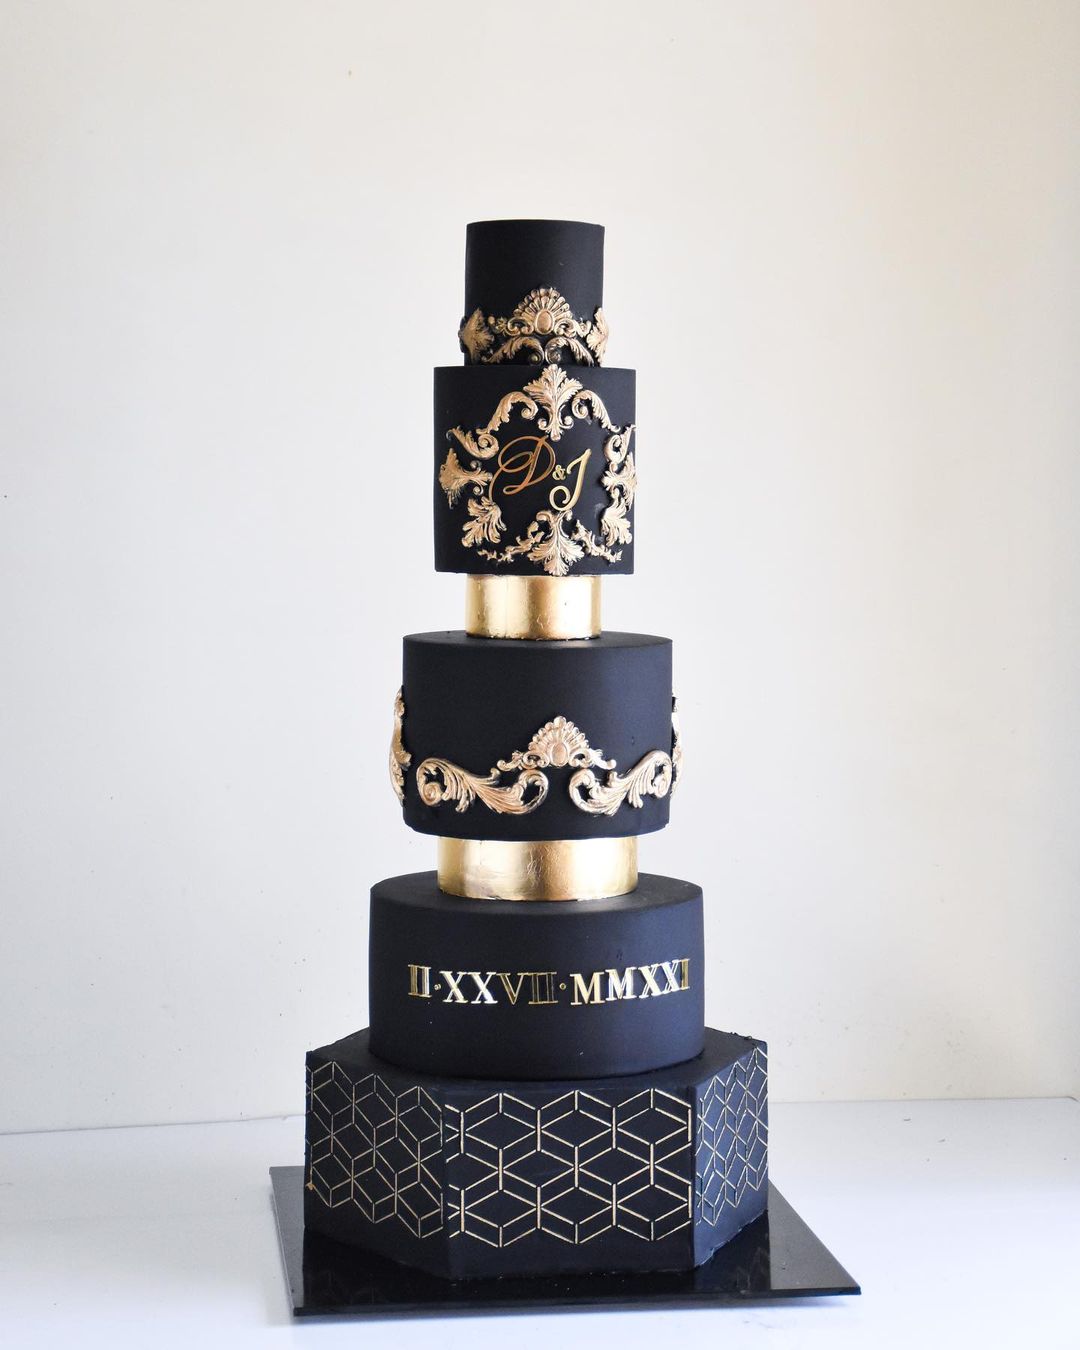 black wedding cake cake with gold and date laombrecreations